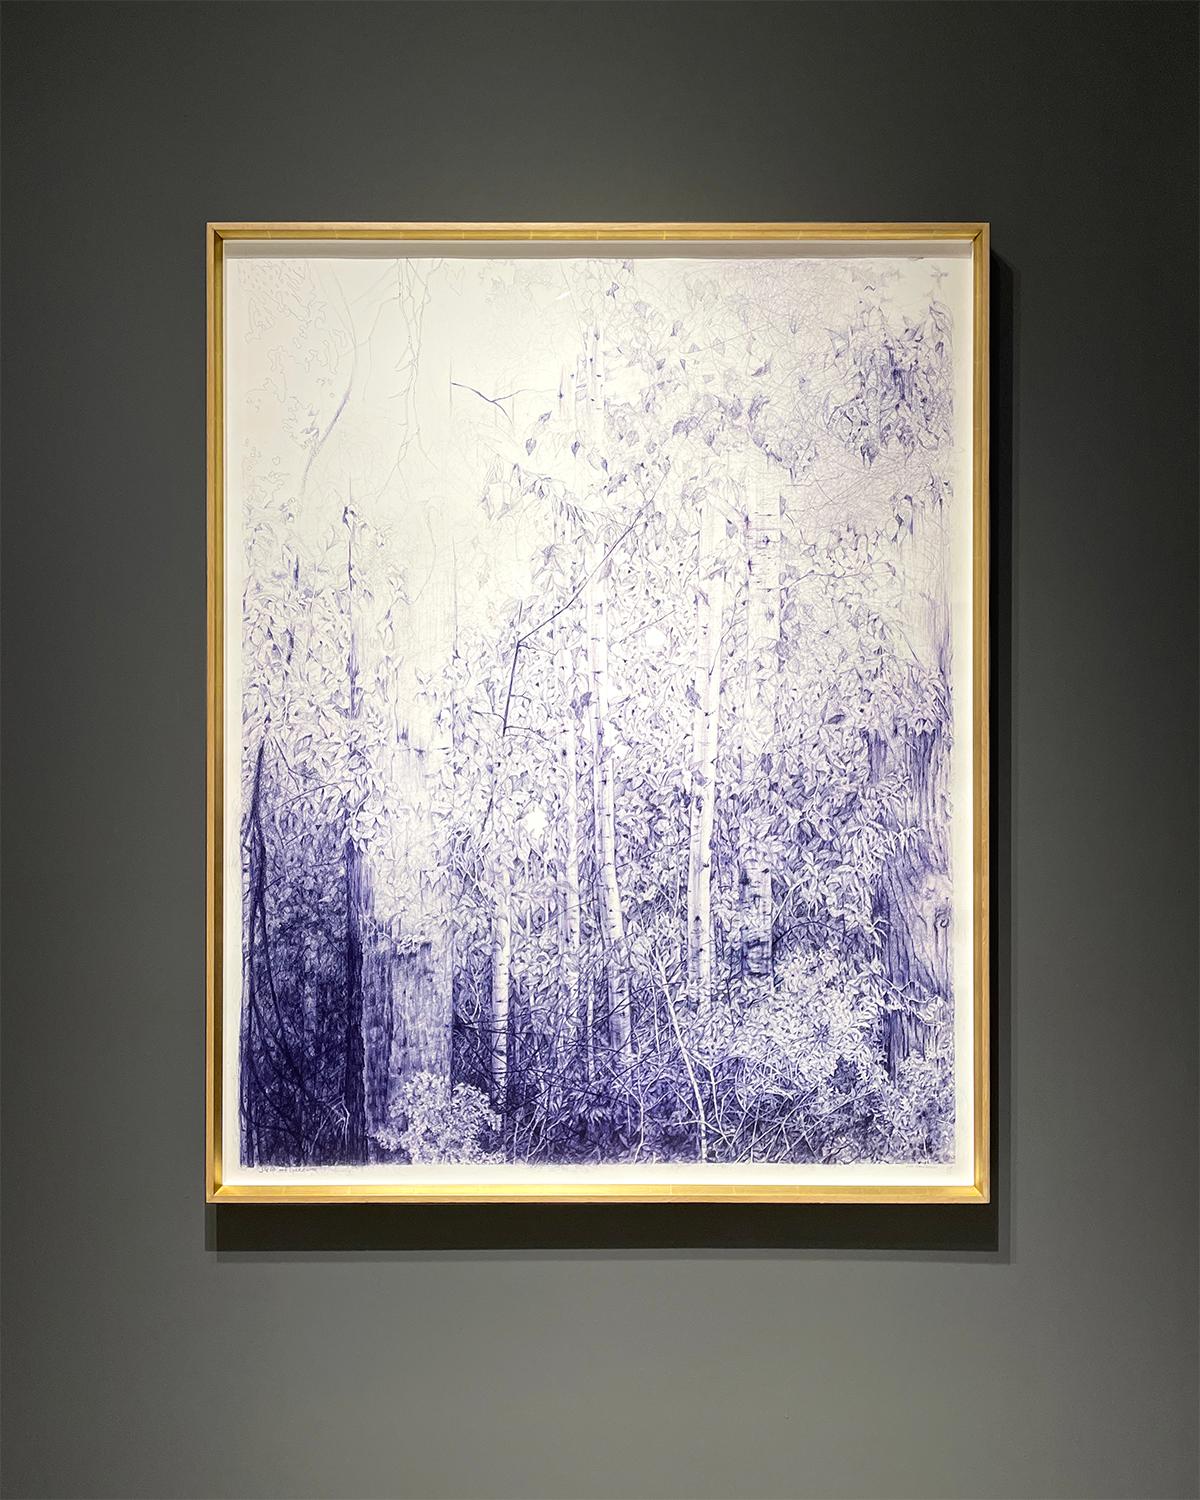 Yield and Overcome (Landscape Drawing of Forest in Archival Blue Ballpoint Pen) - Art by Linda Newman Boughton